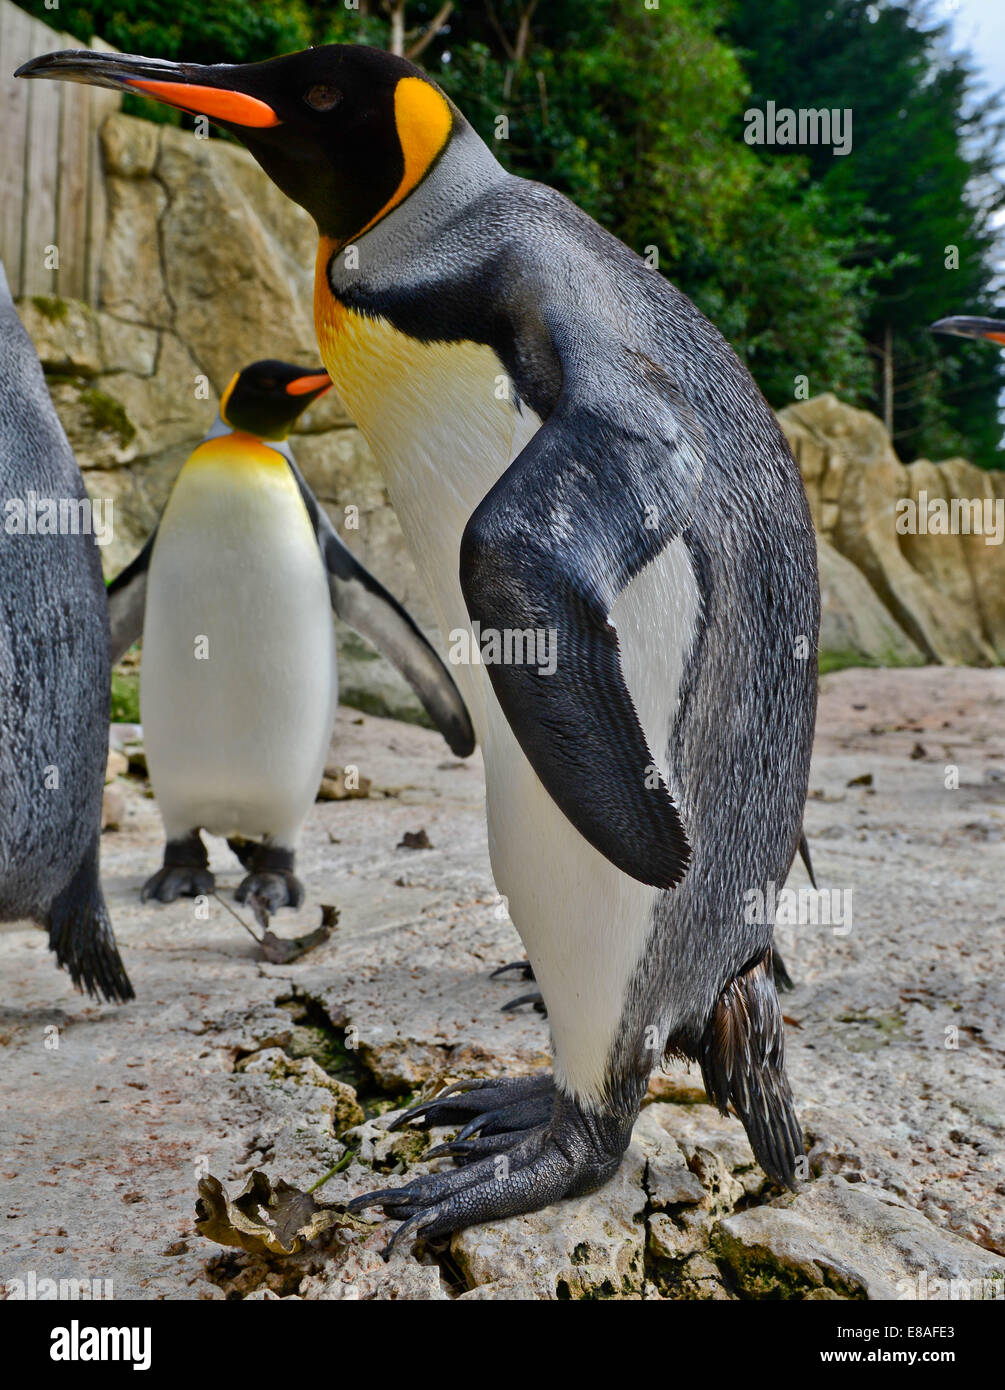 Picture By:Jules Annan Picture Shows:Birdland, Bourton on the Water ..., King Penguins, Birdland is  home to England’s only collection of King Penguins.and have supplied these birds for the Batman film Date:  02/10/2014 Stock Photo